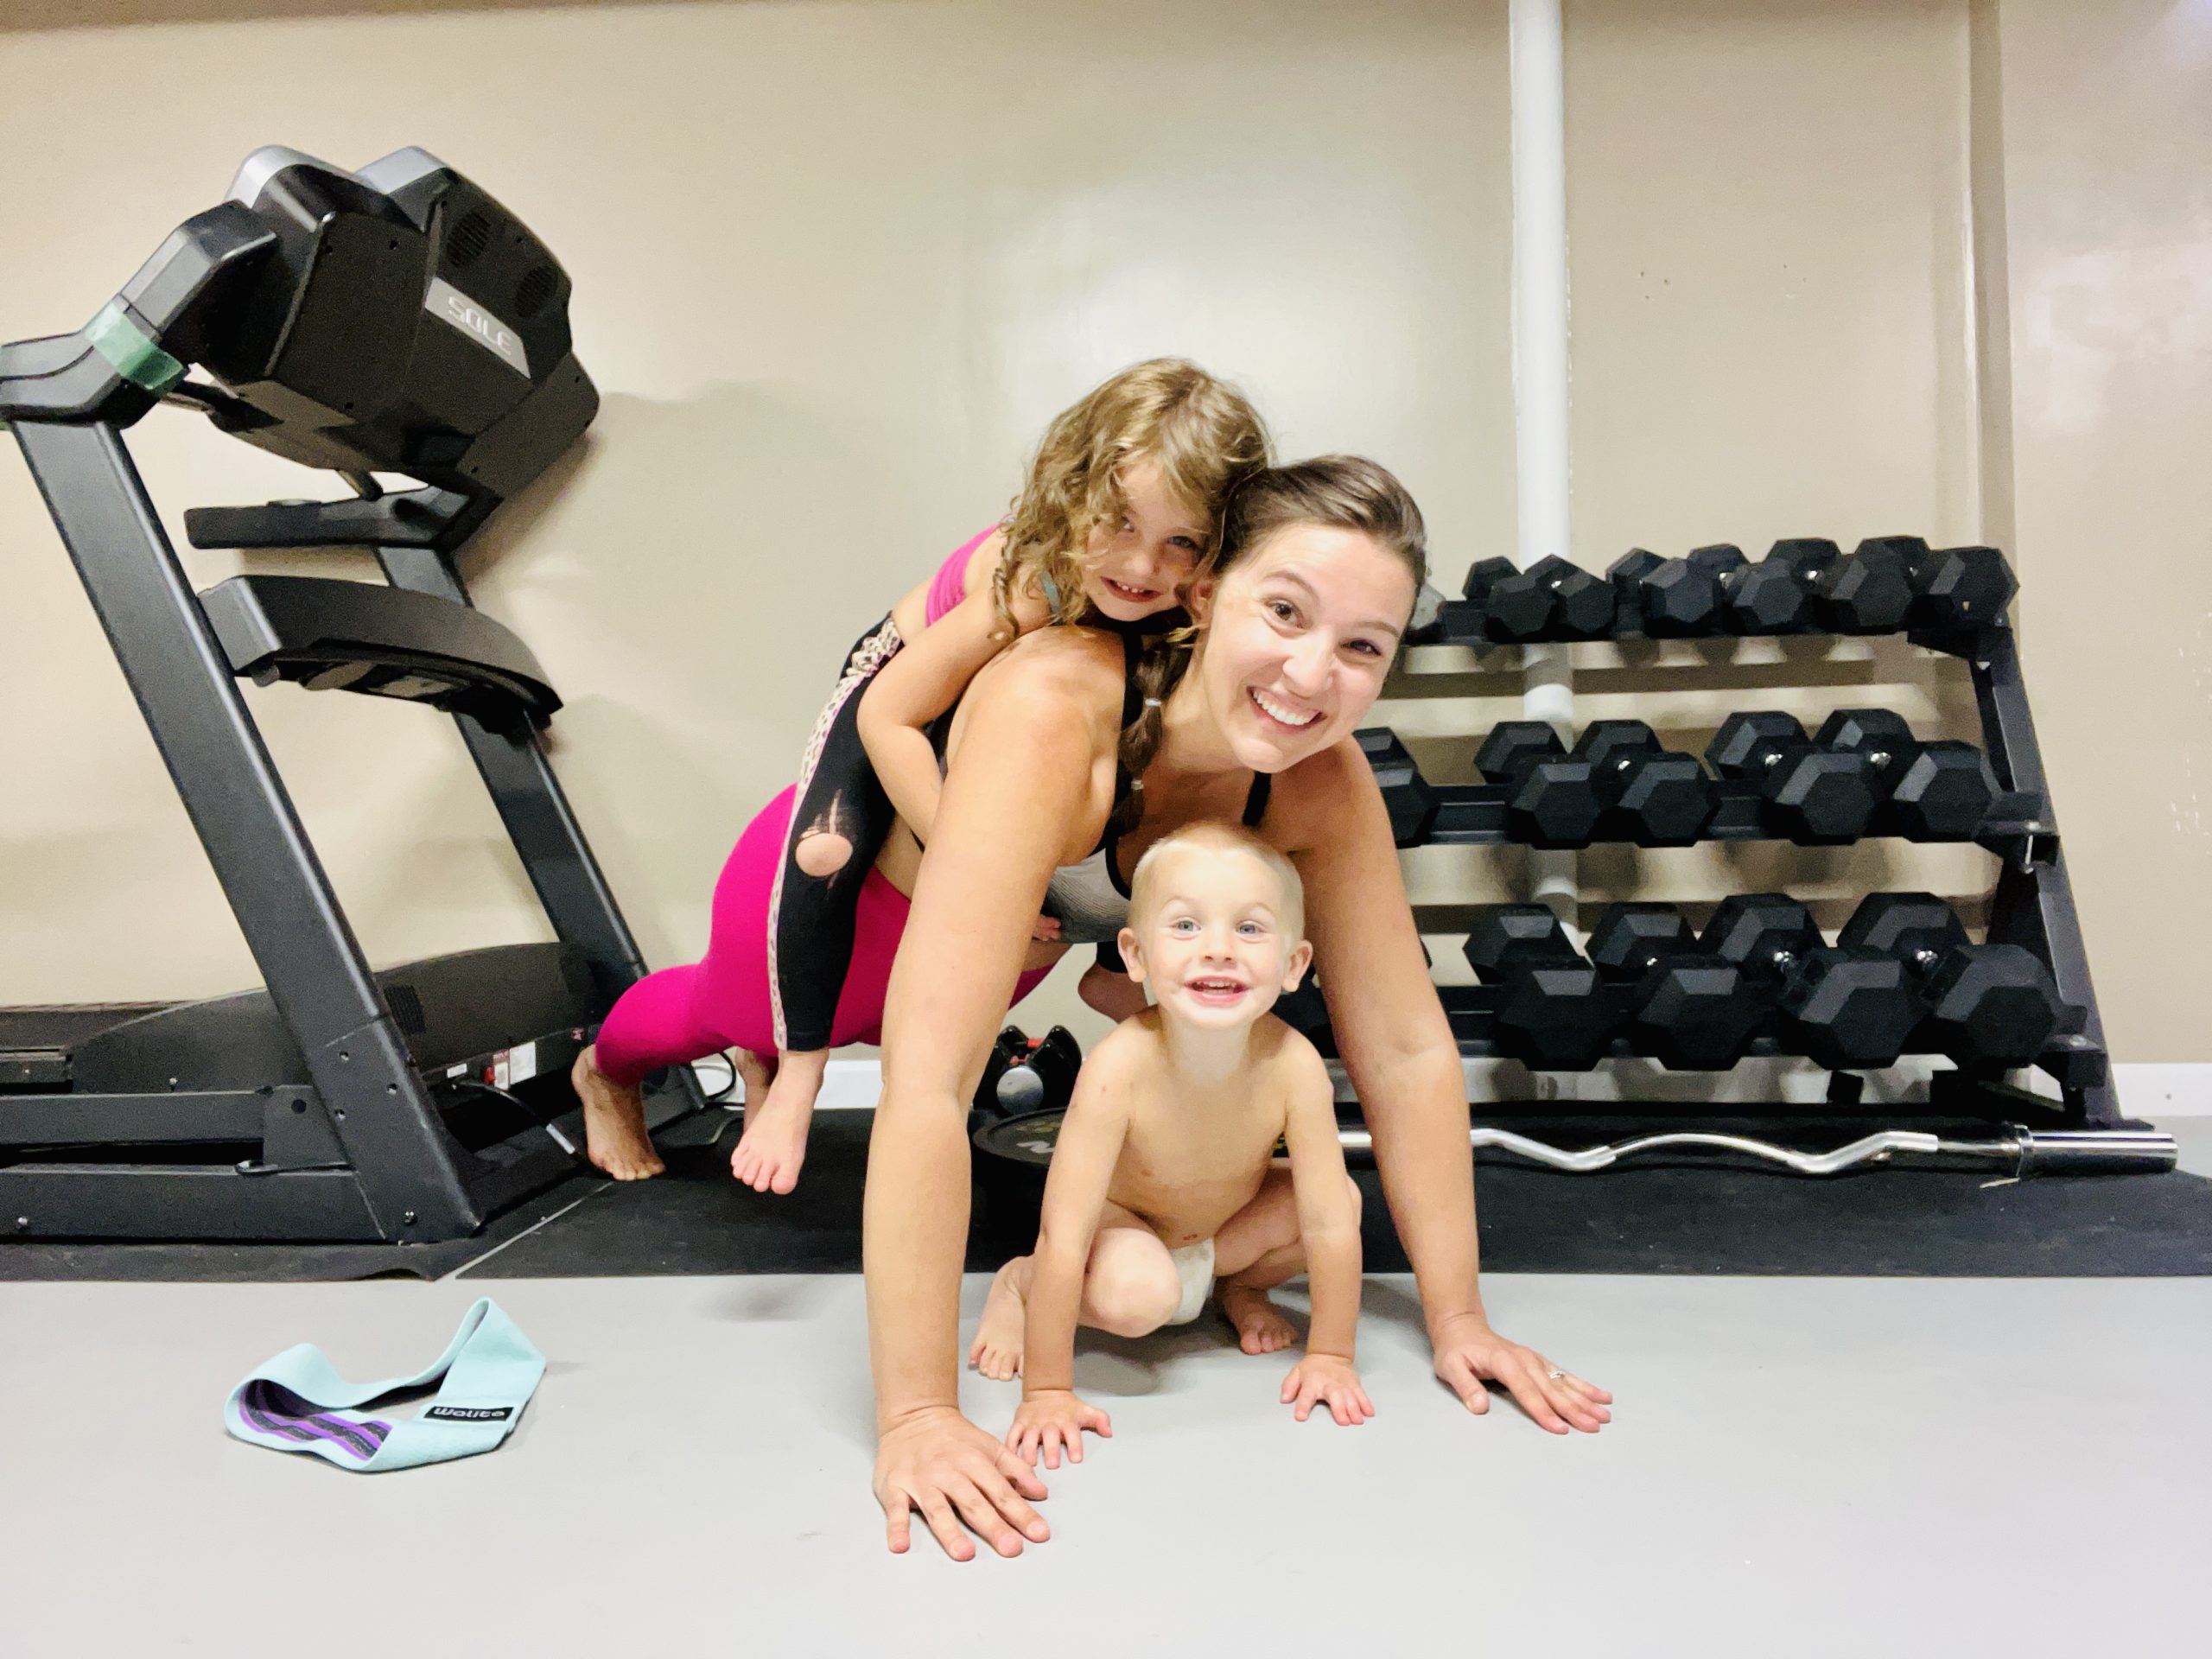 PART 1: Exhaustion, Energy Exercise as a Mom